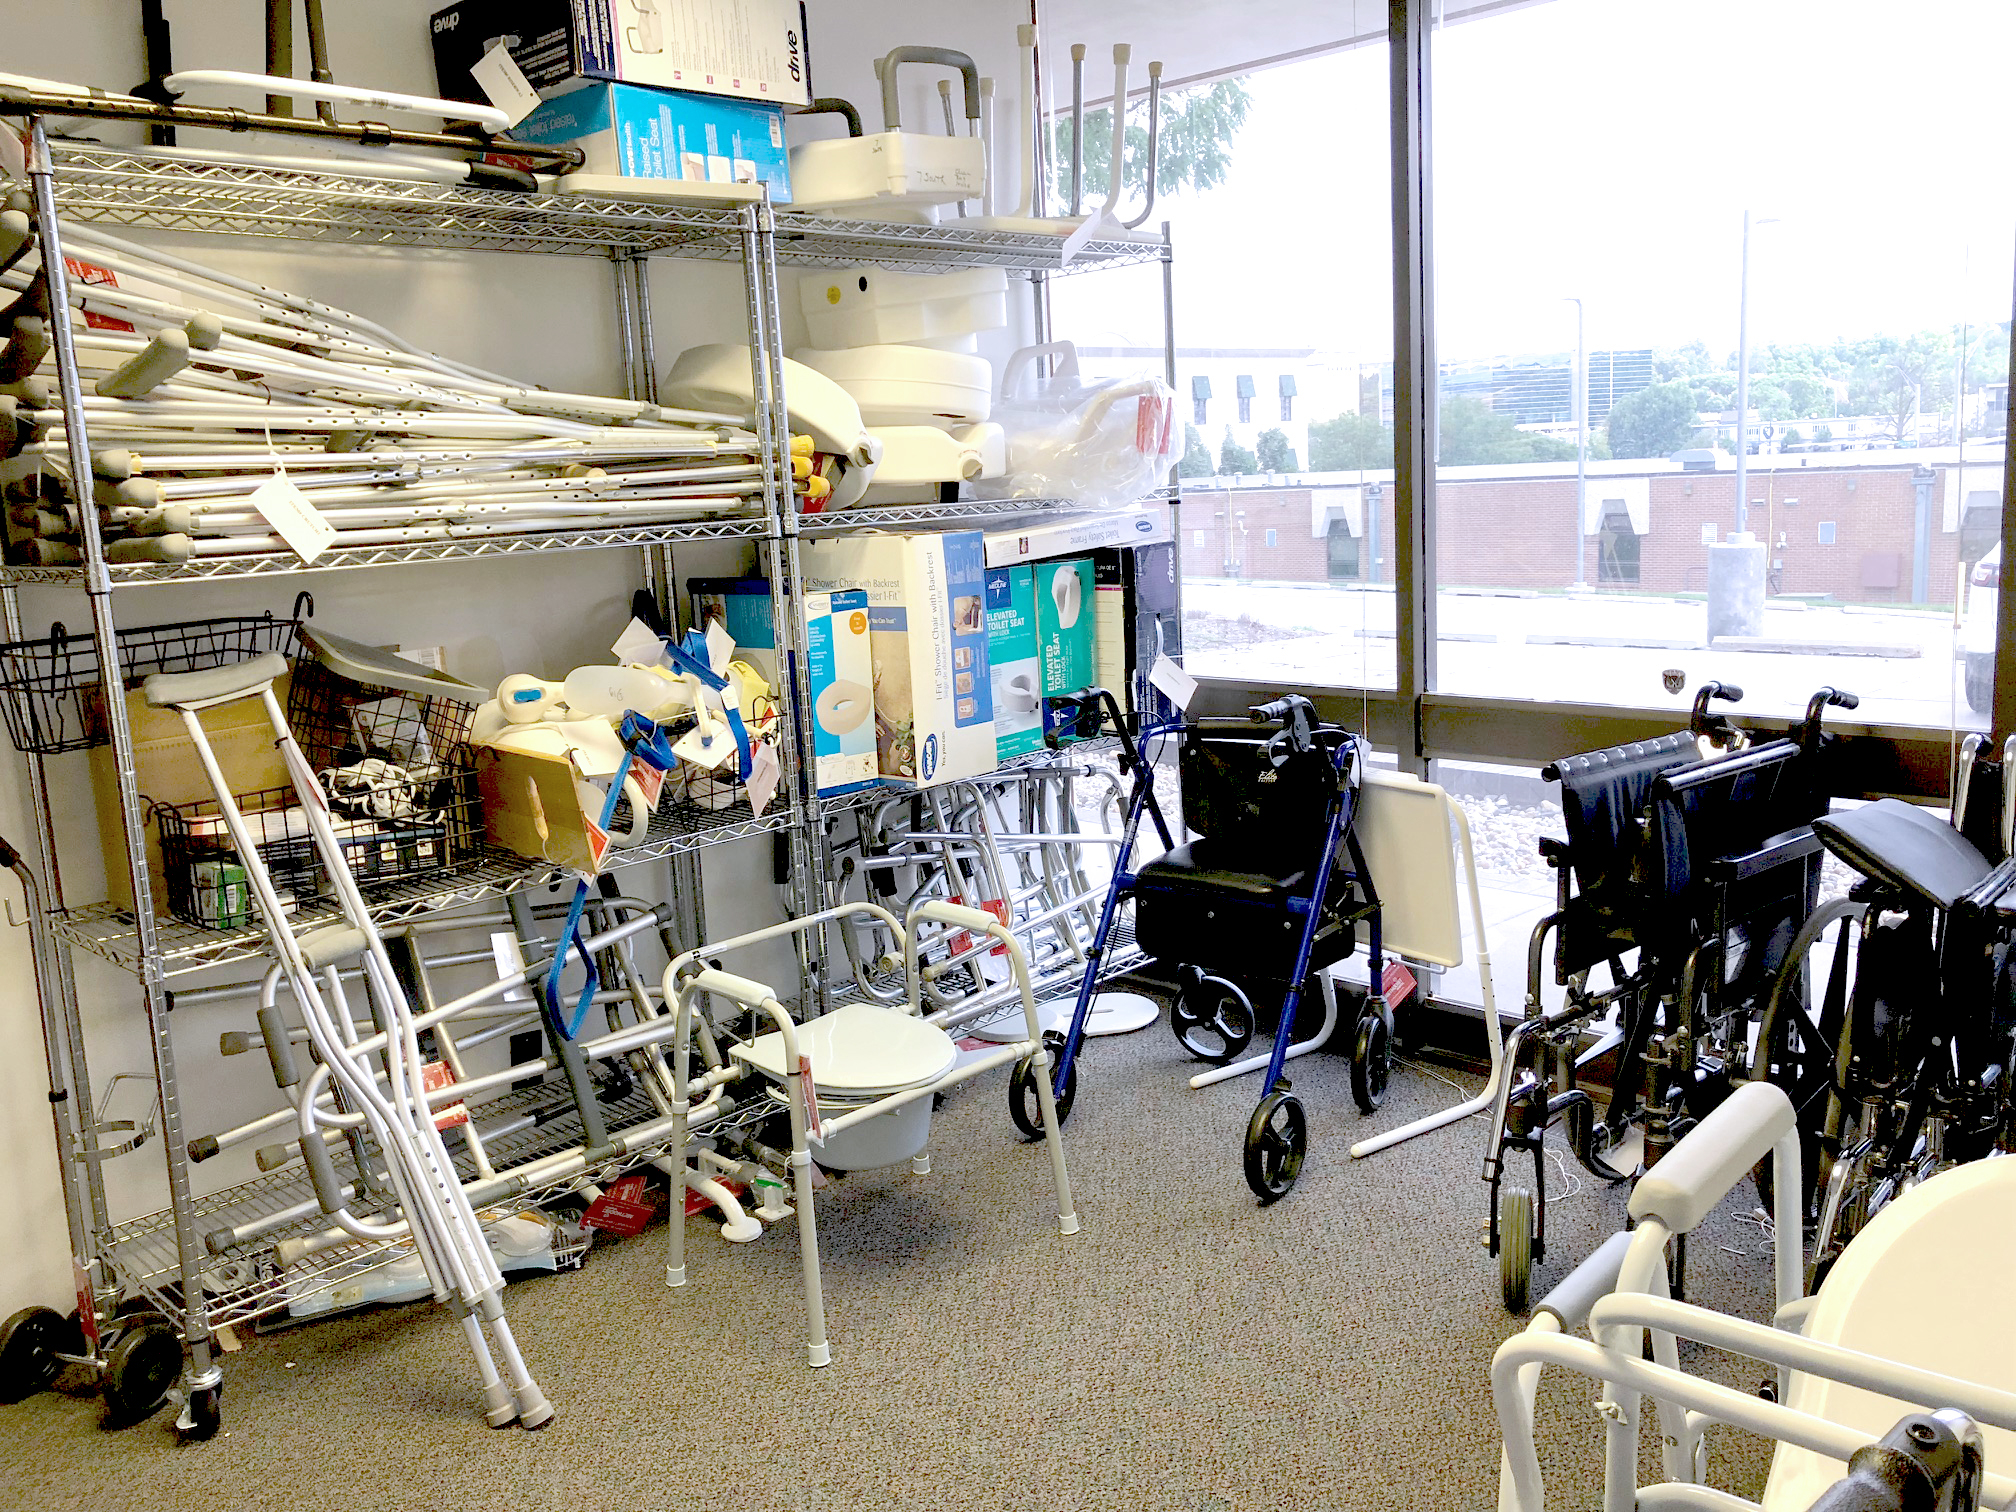 Medical equipment in a storage room